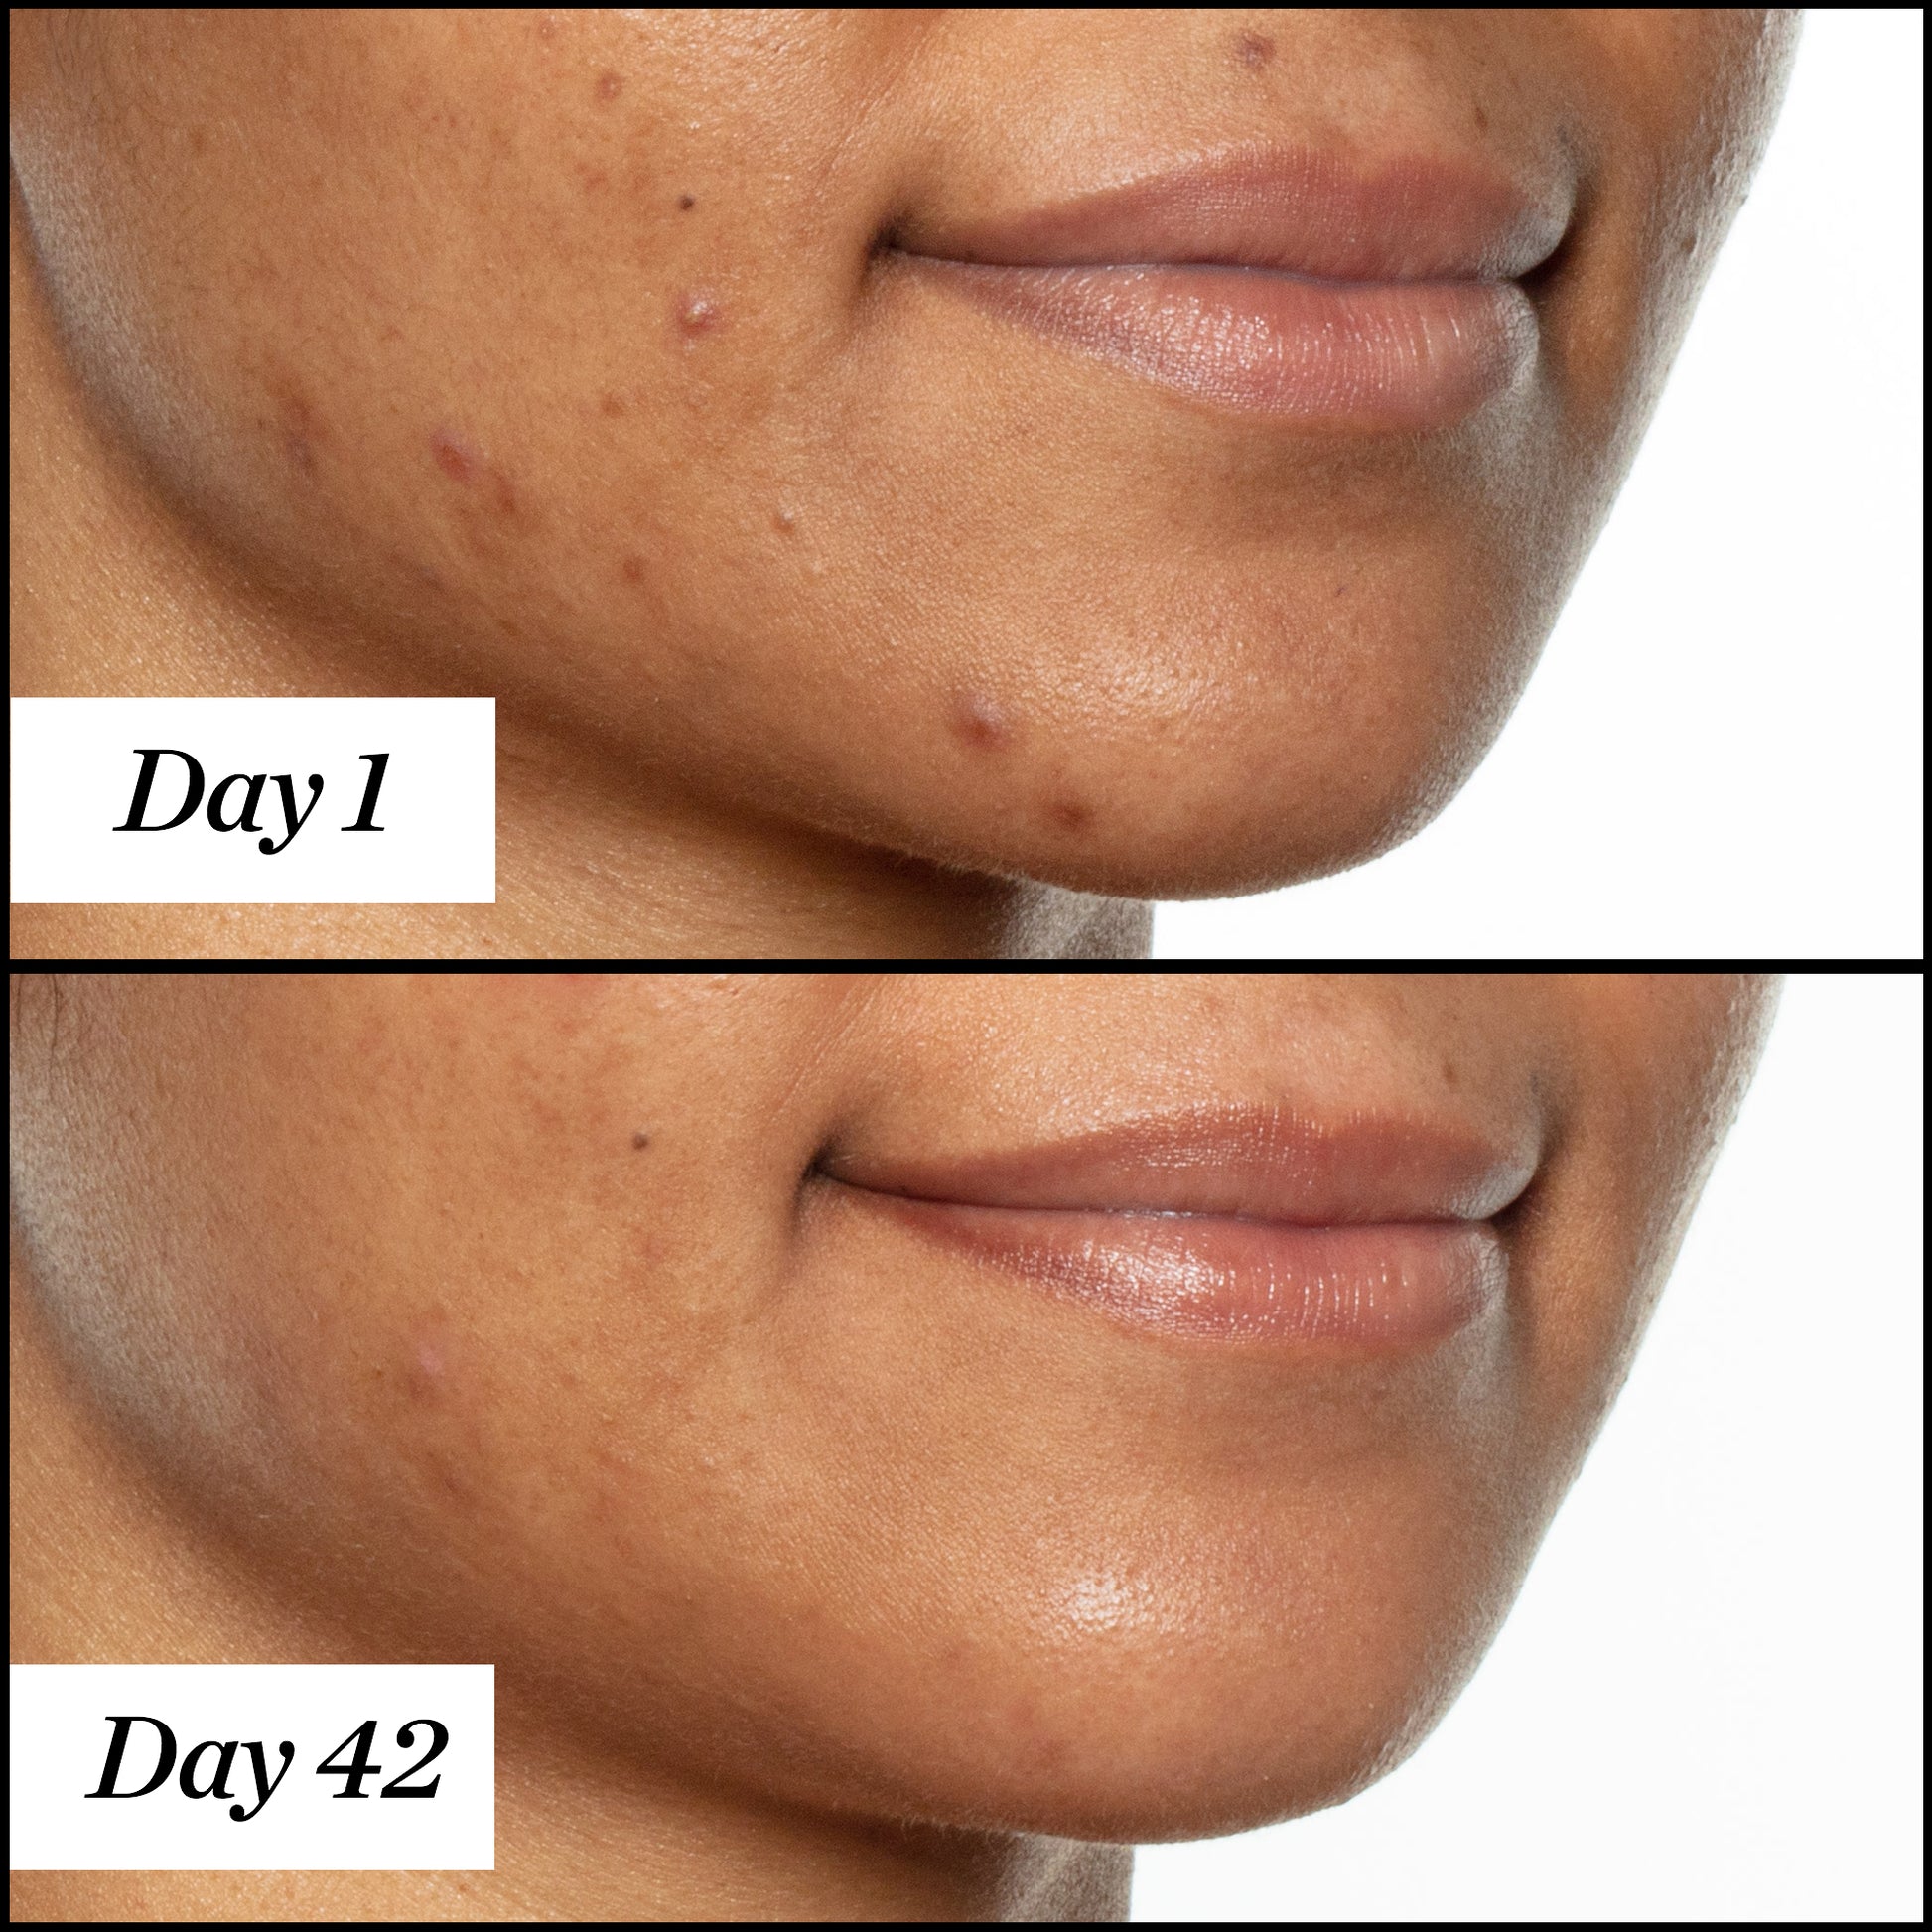 U.F.O. product usage, before and after results from day 1 to day 42 on dark skin. Clear and visible results; reduced redness and acne.